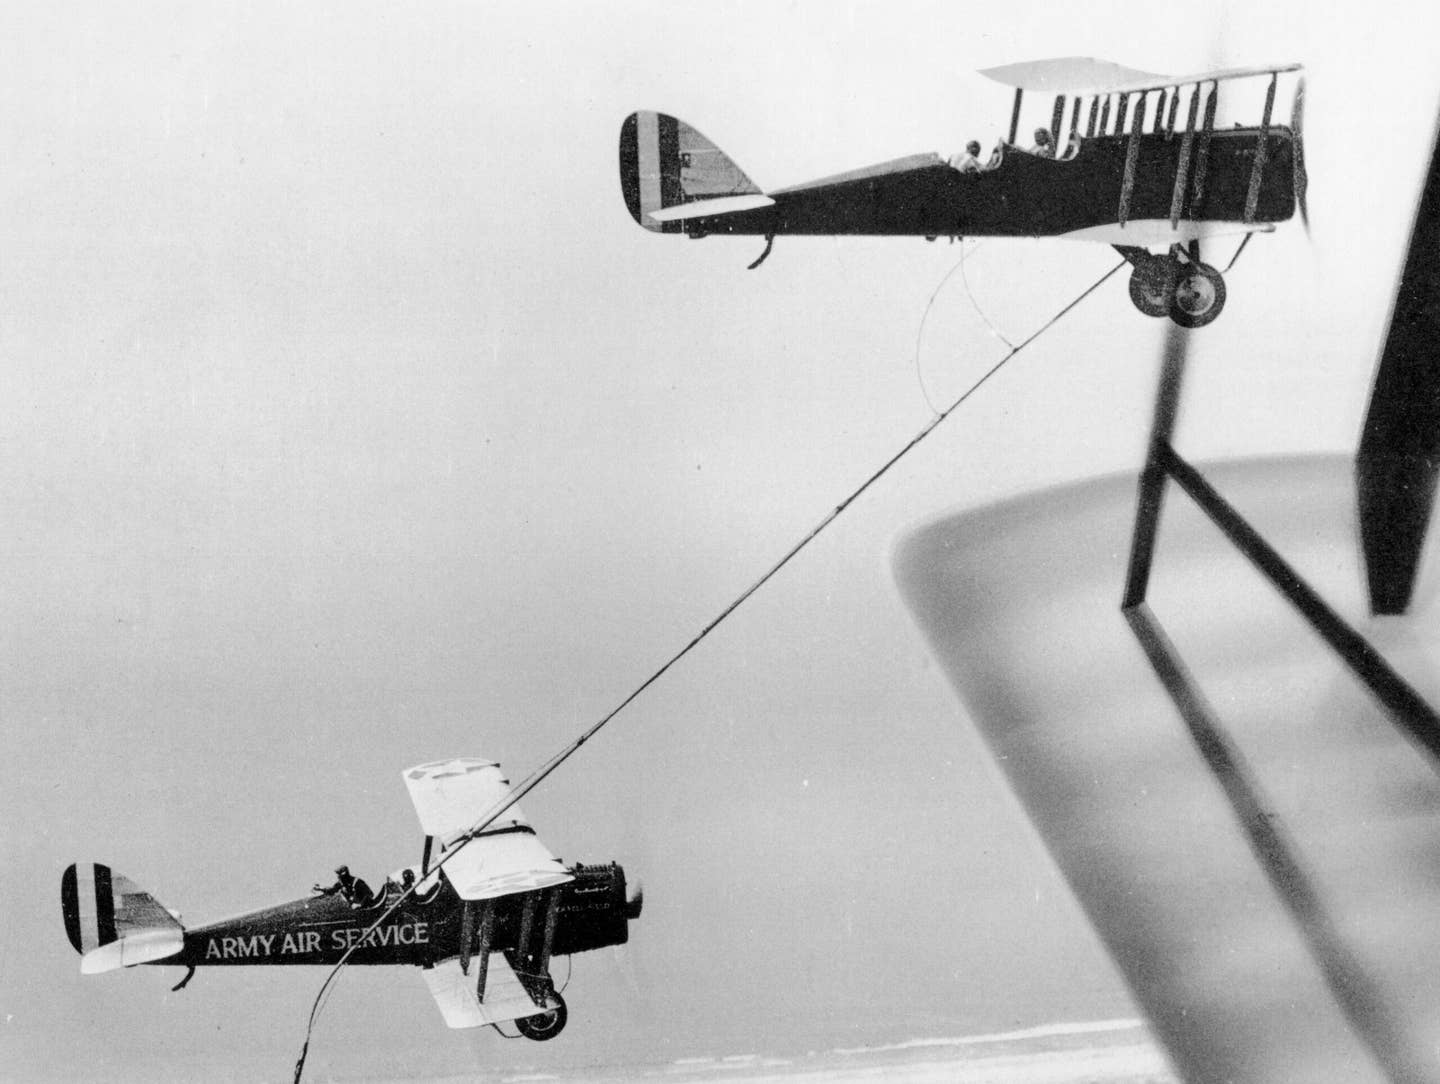 army air service aerial refueling